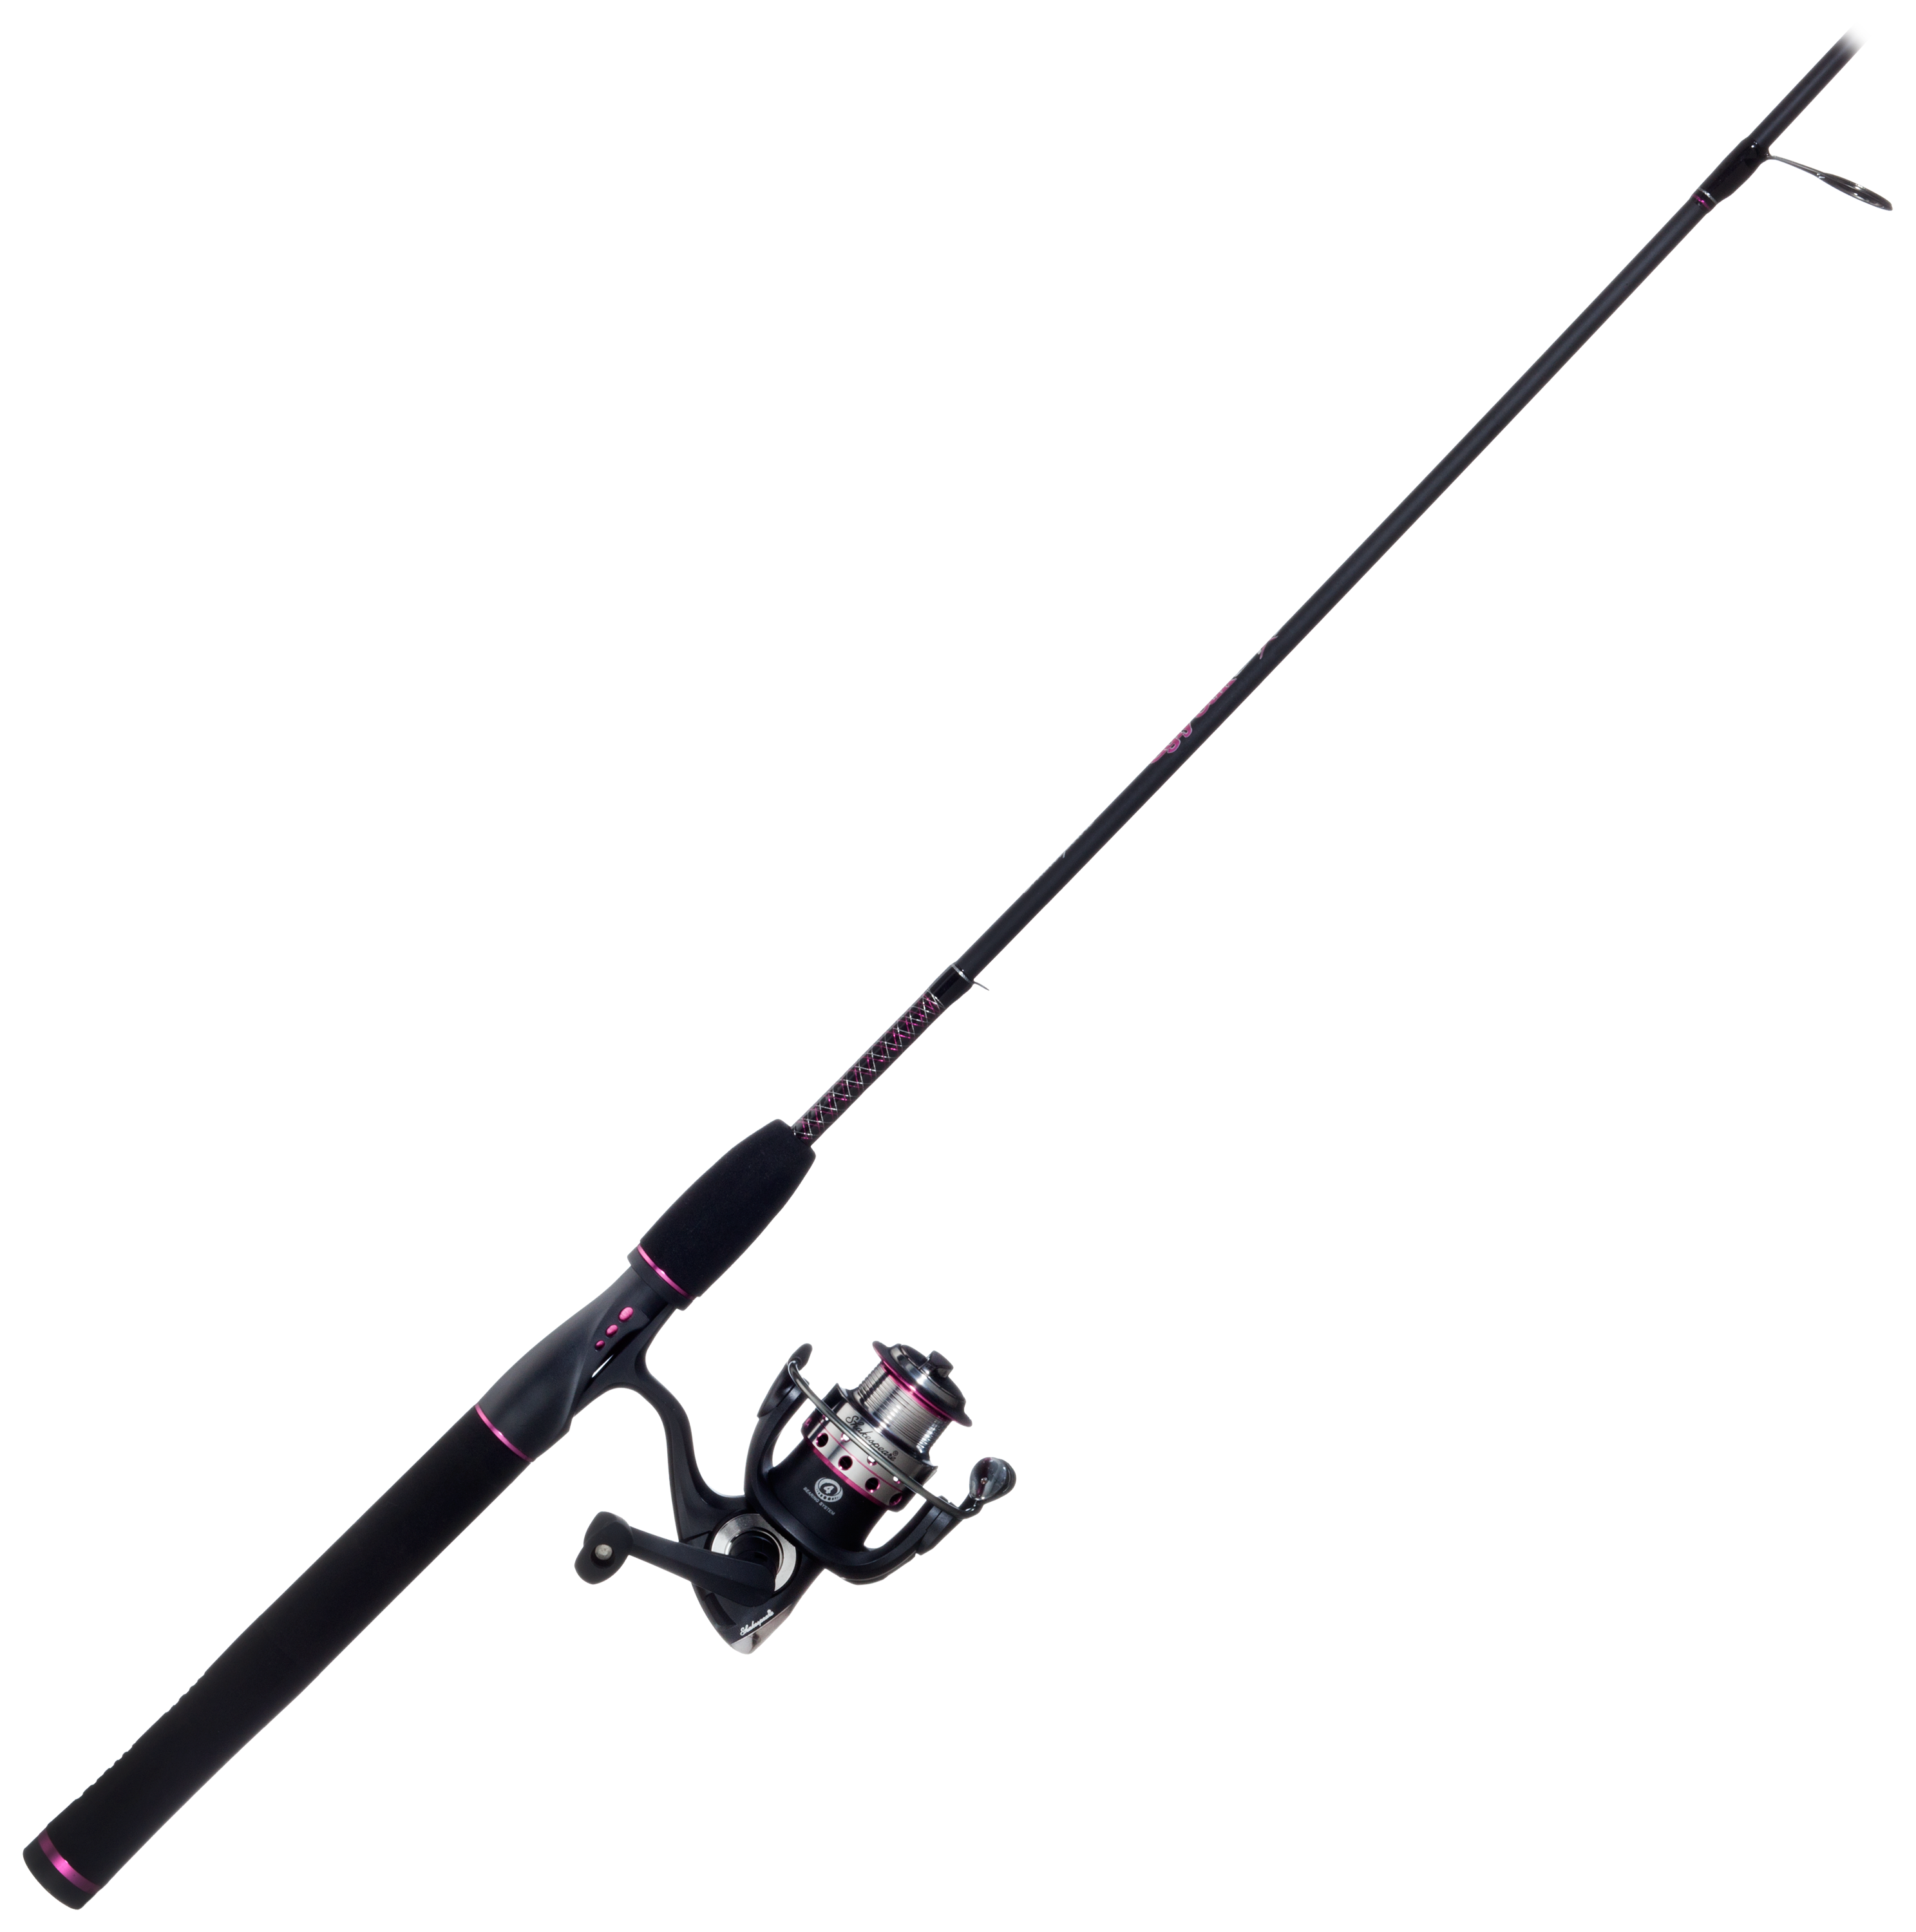 Ugly Stik Fishing Reel and Rod Combo Kits (All Models & Sizes)